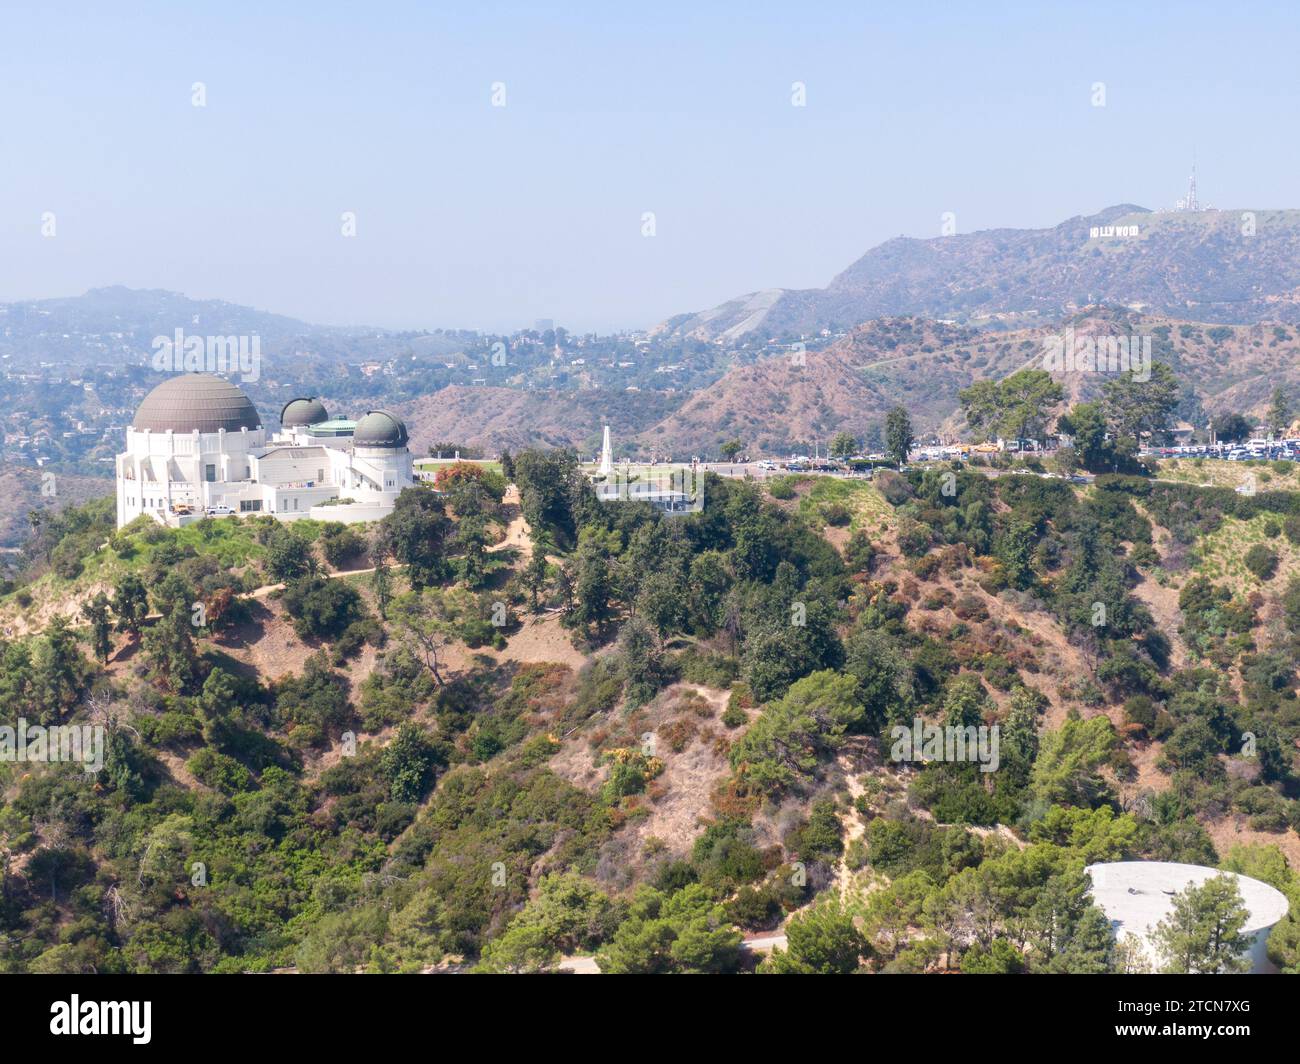 Stock drone images of Griffith Observatory in Los Angeles on a hazy summer afternoon. Stock Photo